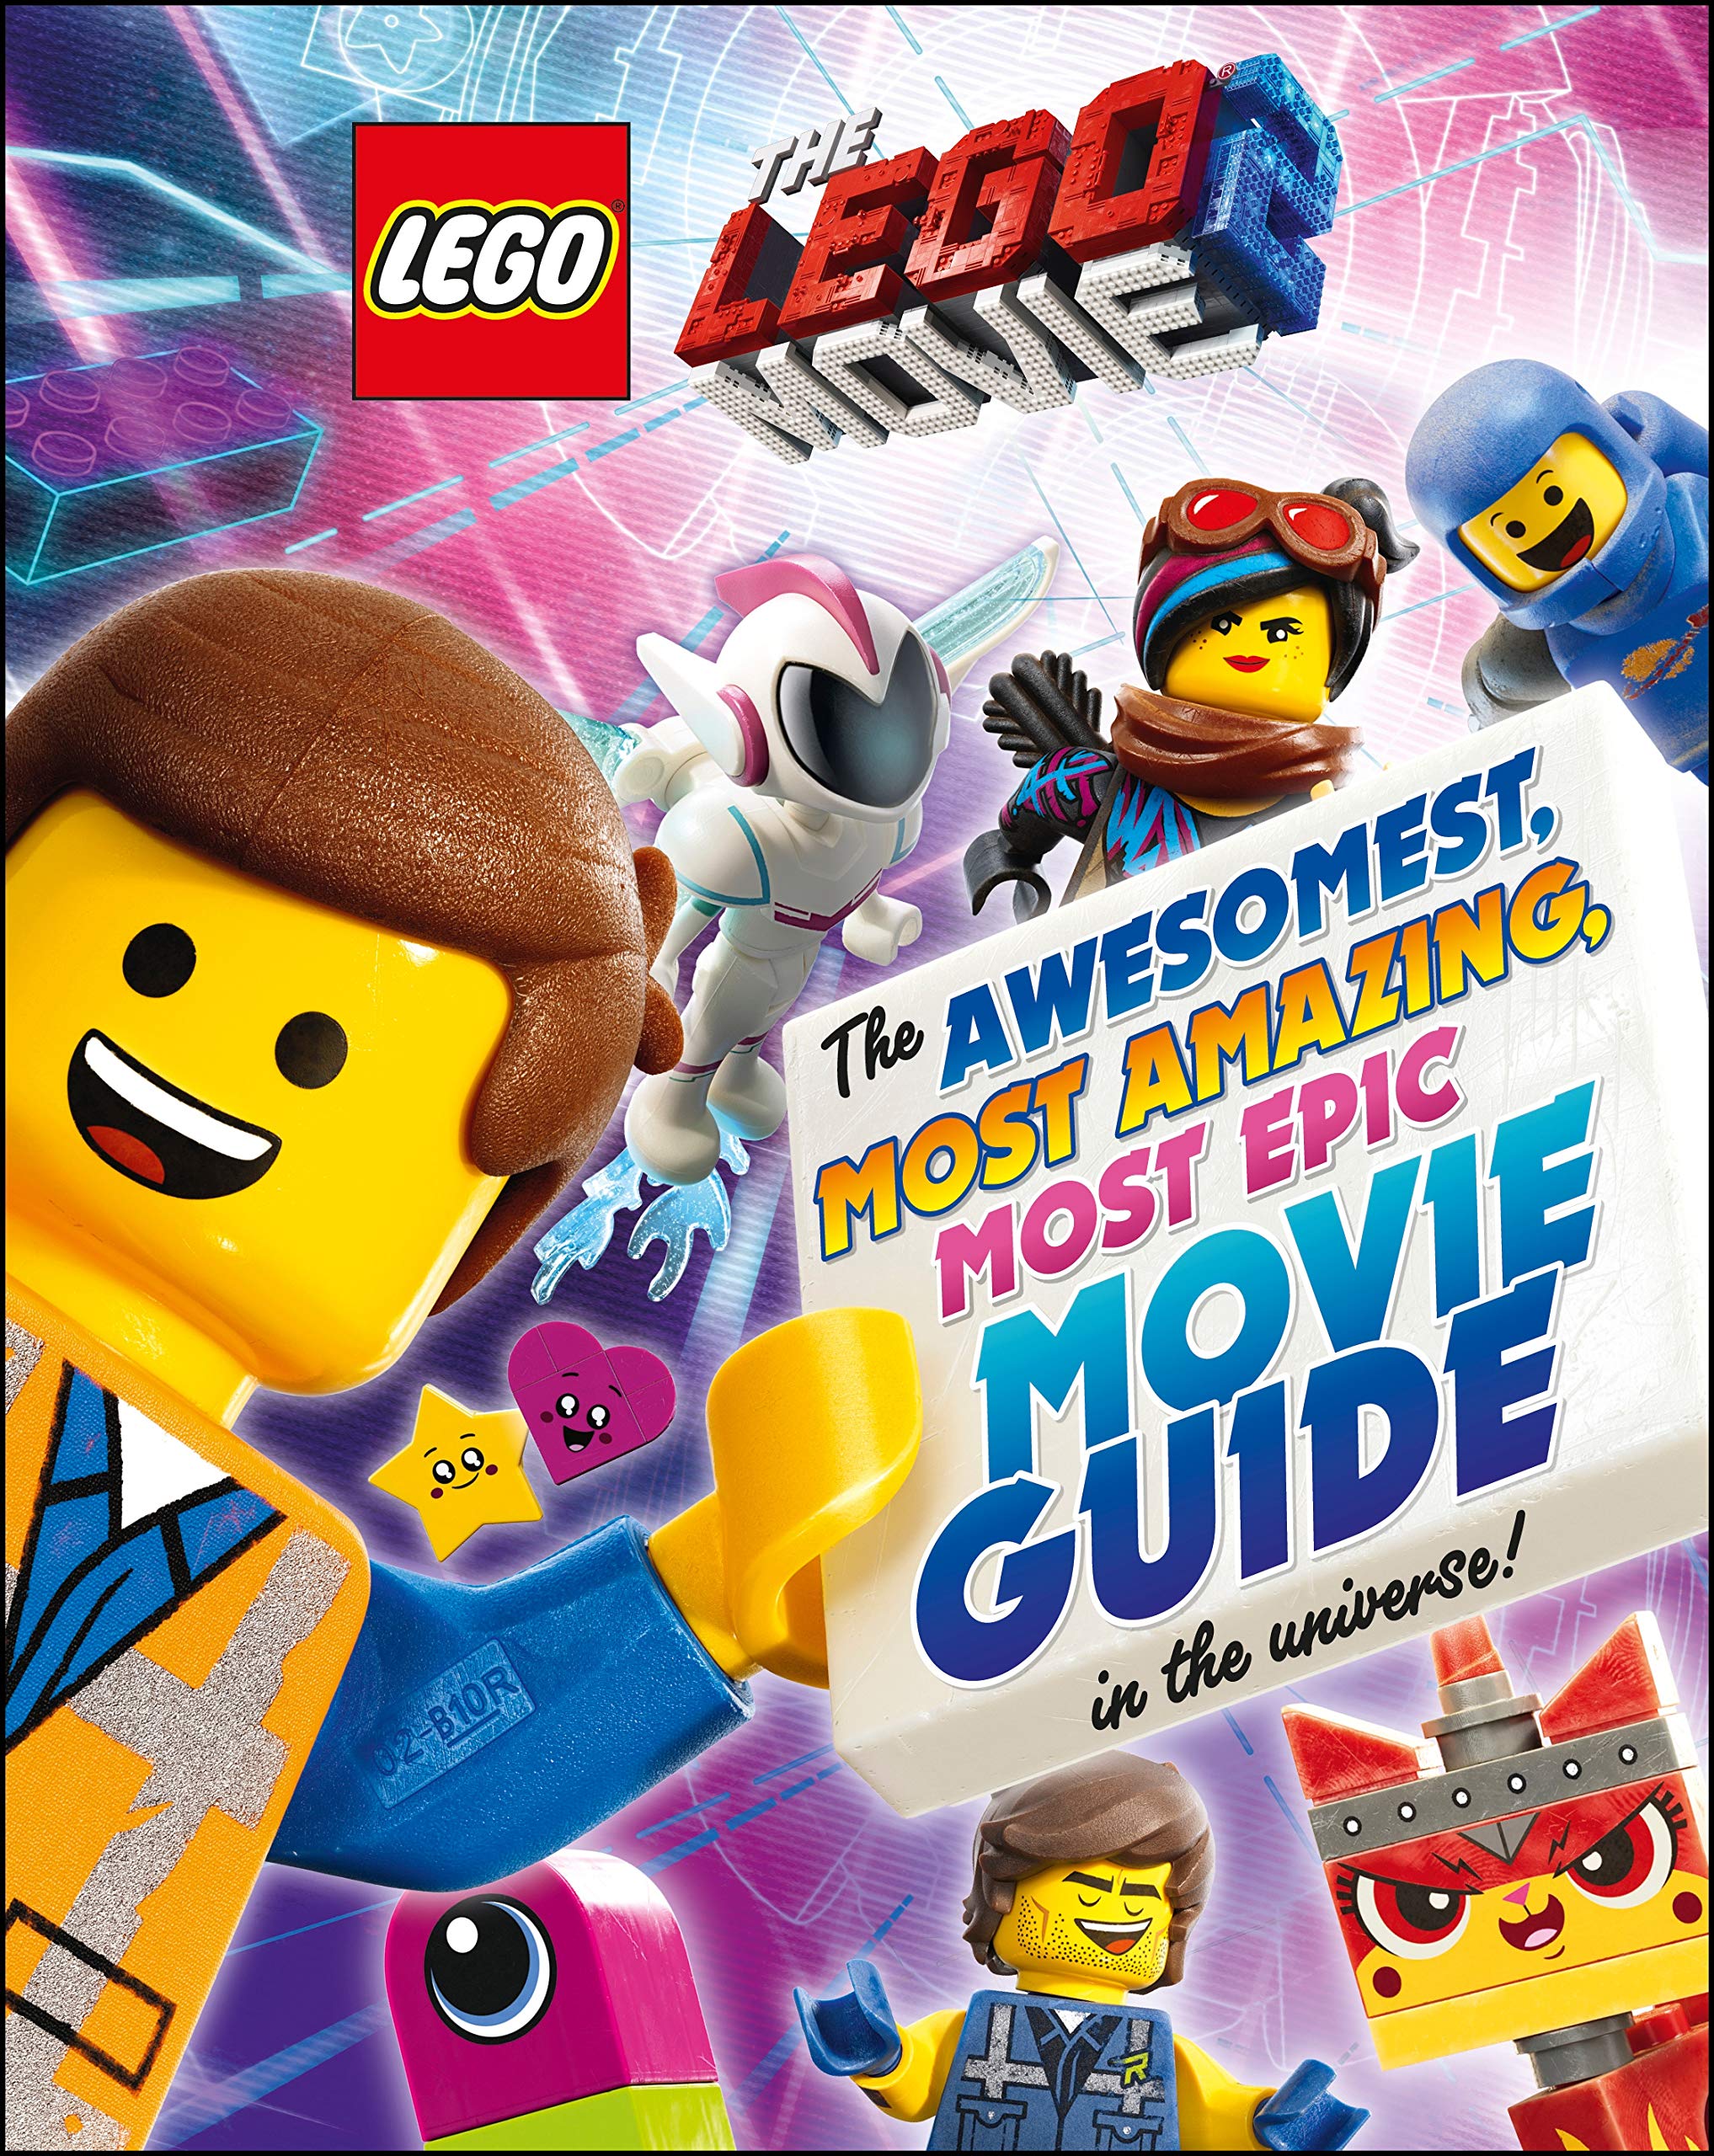 New Books Released for The LEGO Movie 2 - The Brick Fan